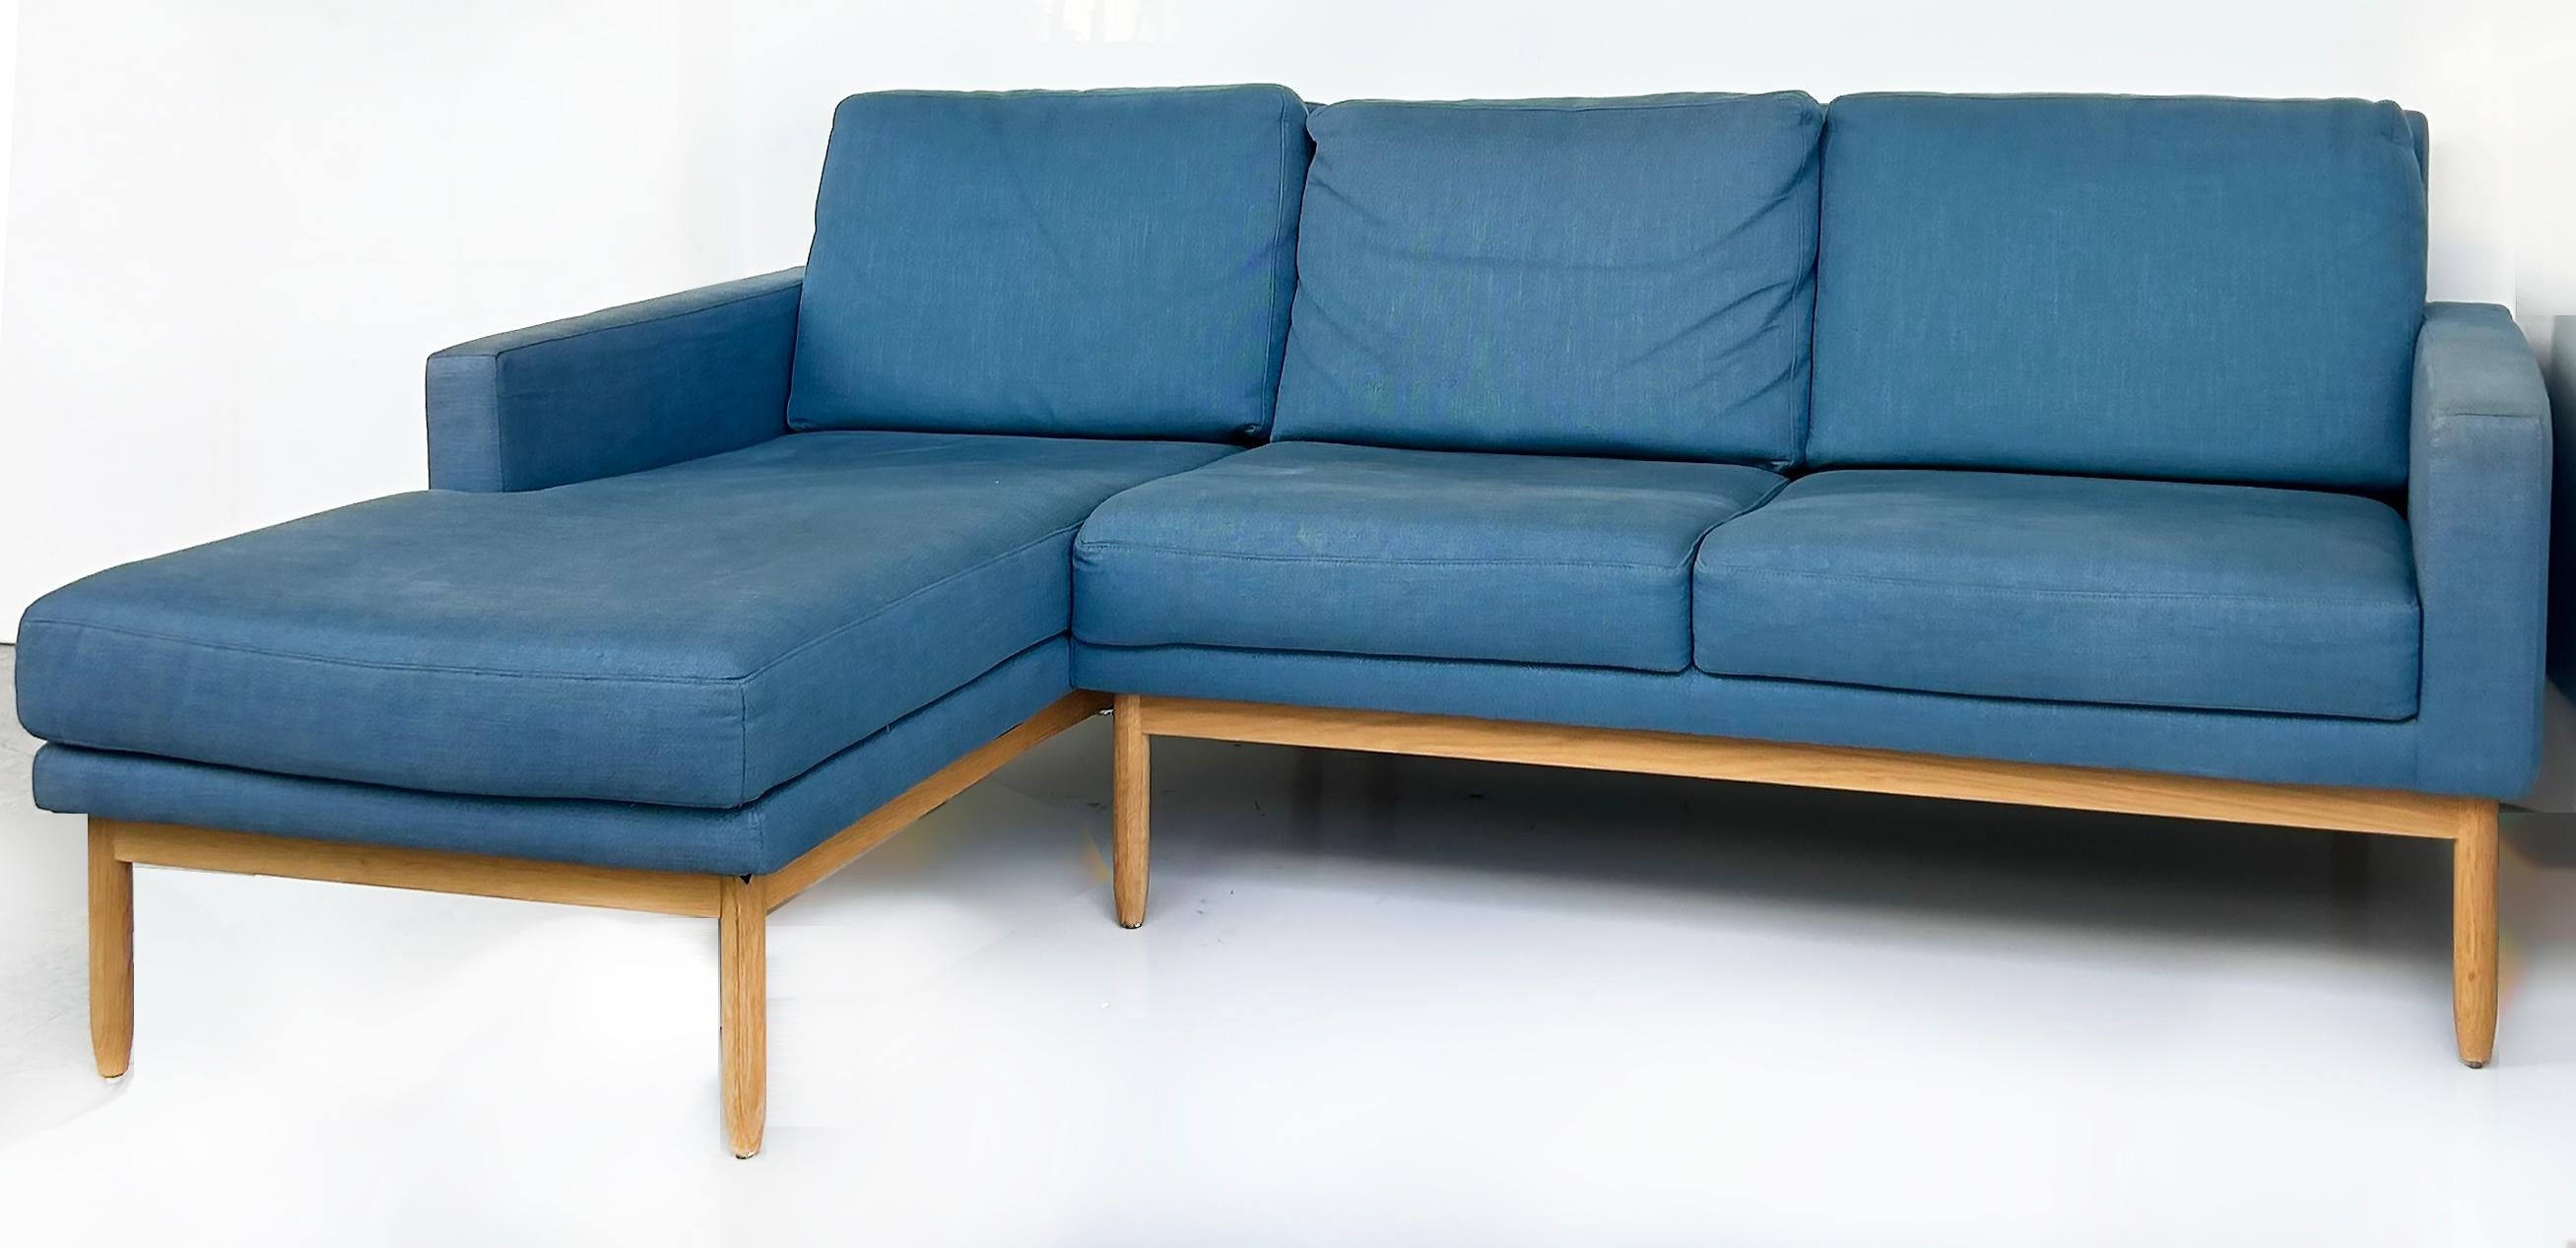 Design Within Reach Raleigh Sectional Sofa Designed by J. Bernett and N.Dodziuk 

Offered for sale is a 